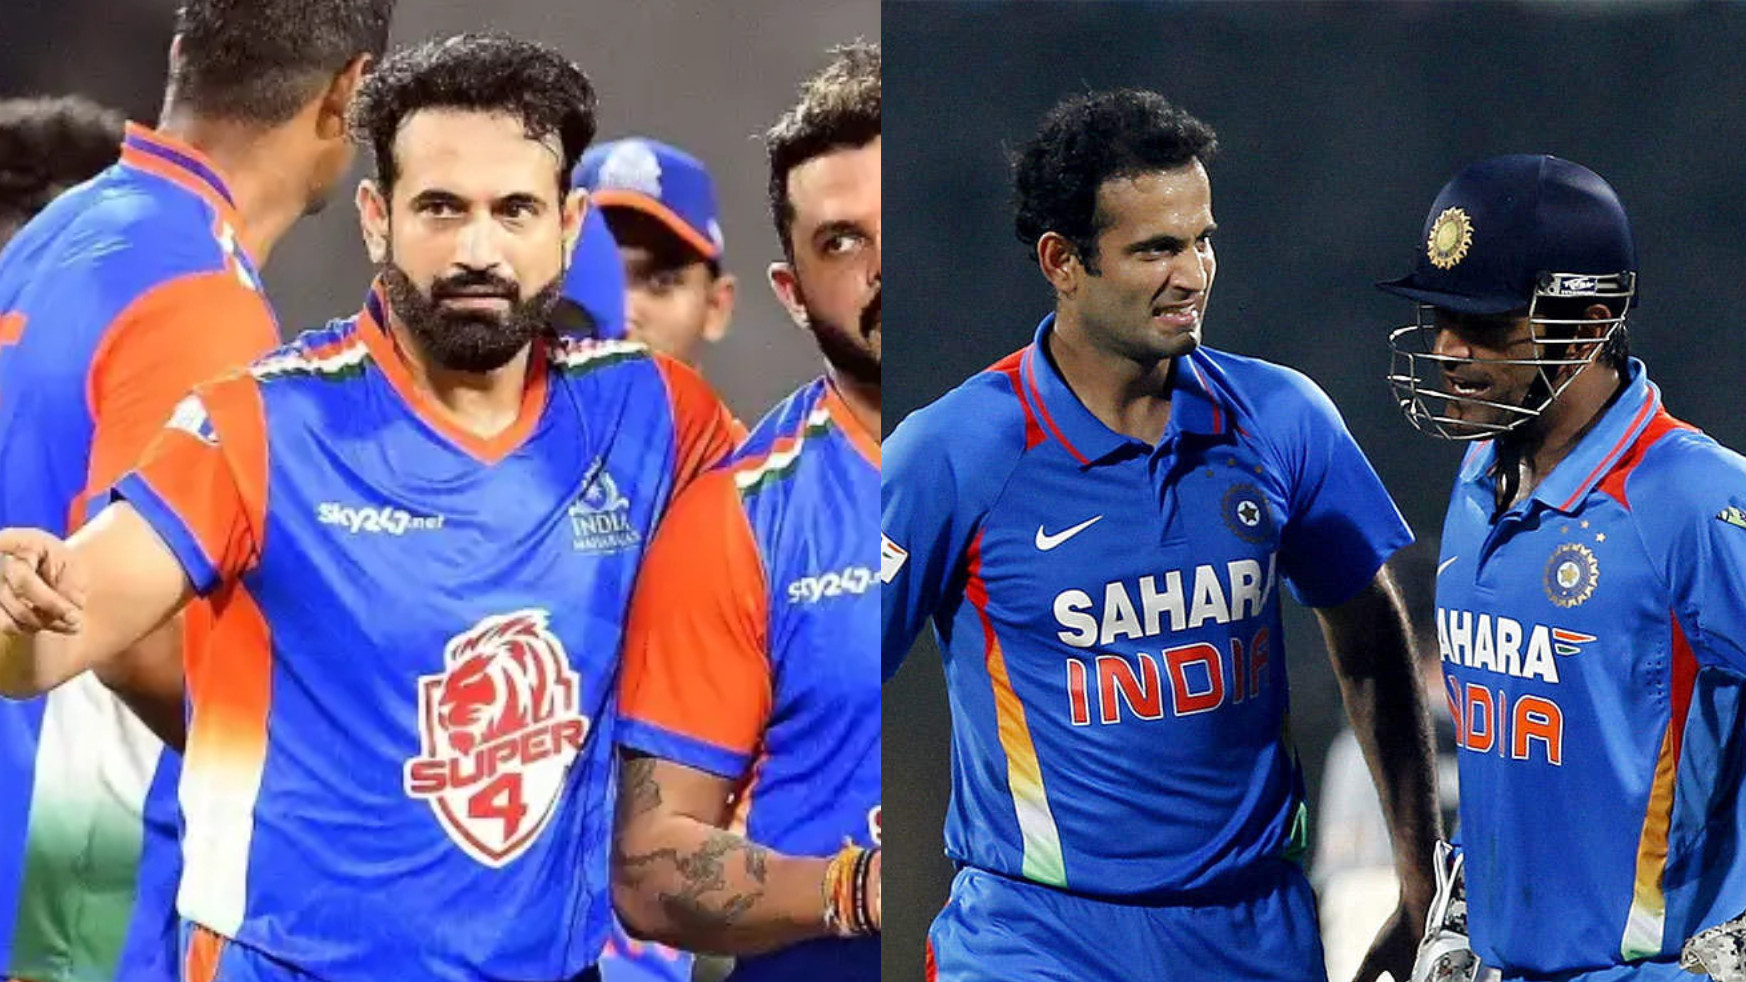 Irfan Pathan gives heart-winning response to fan’s ‘I curse MS Dhoni and his management’ comment